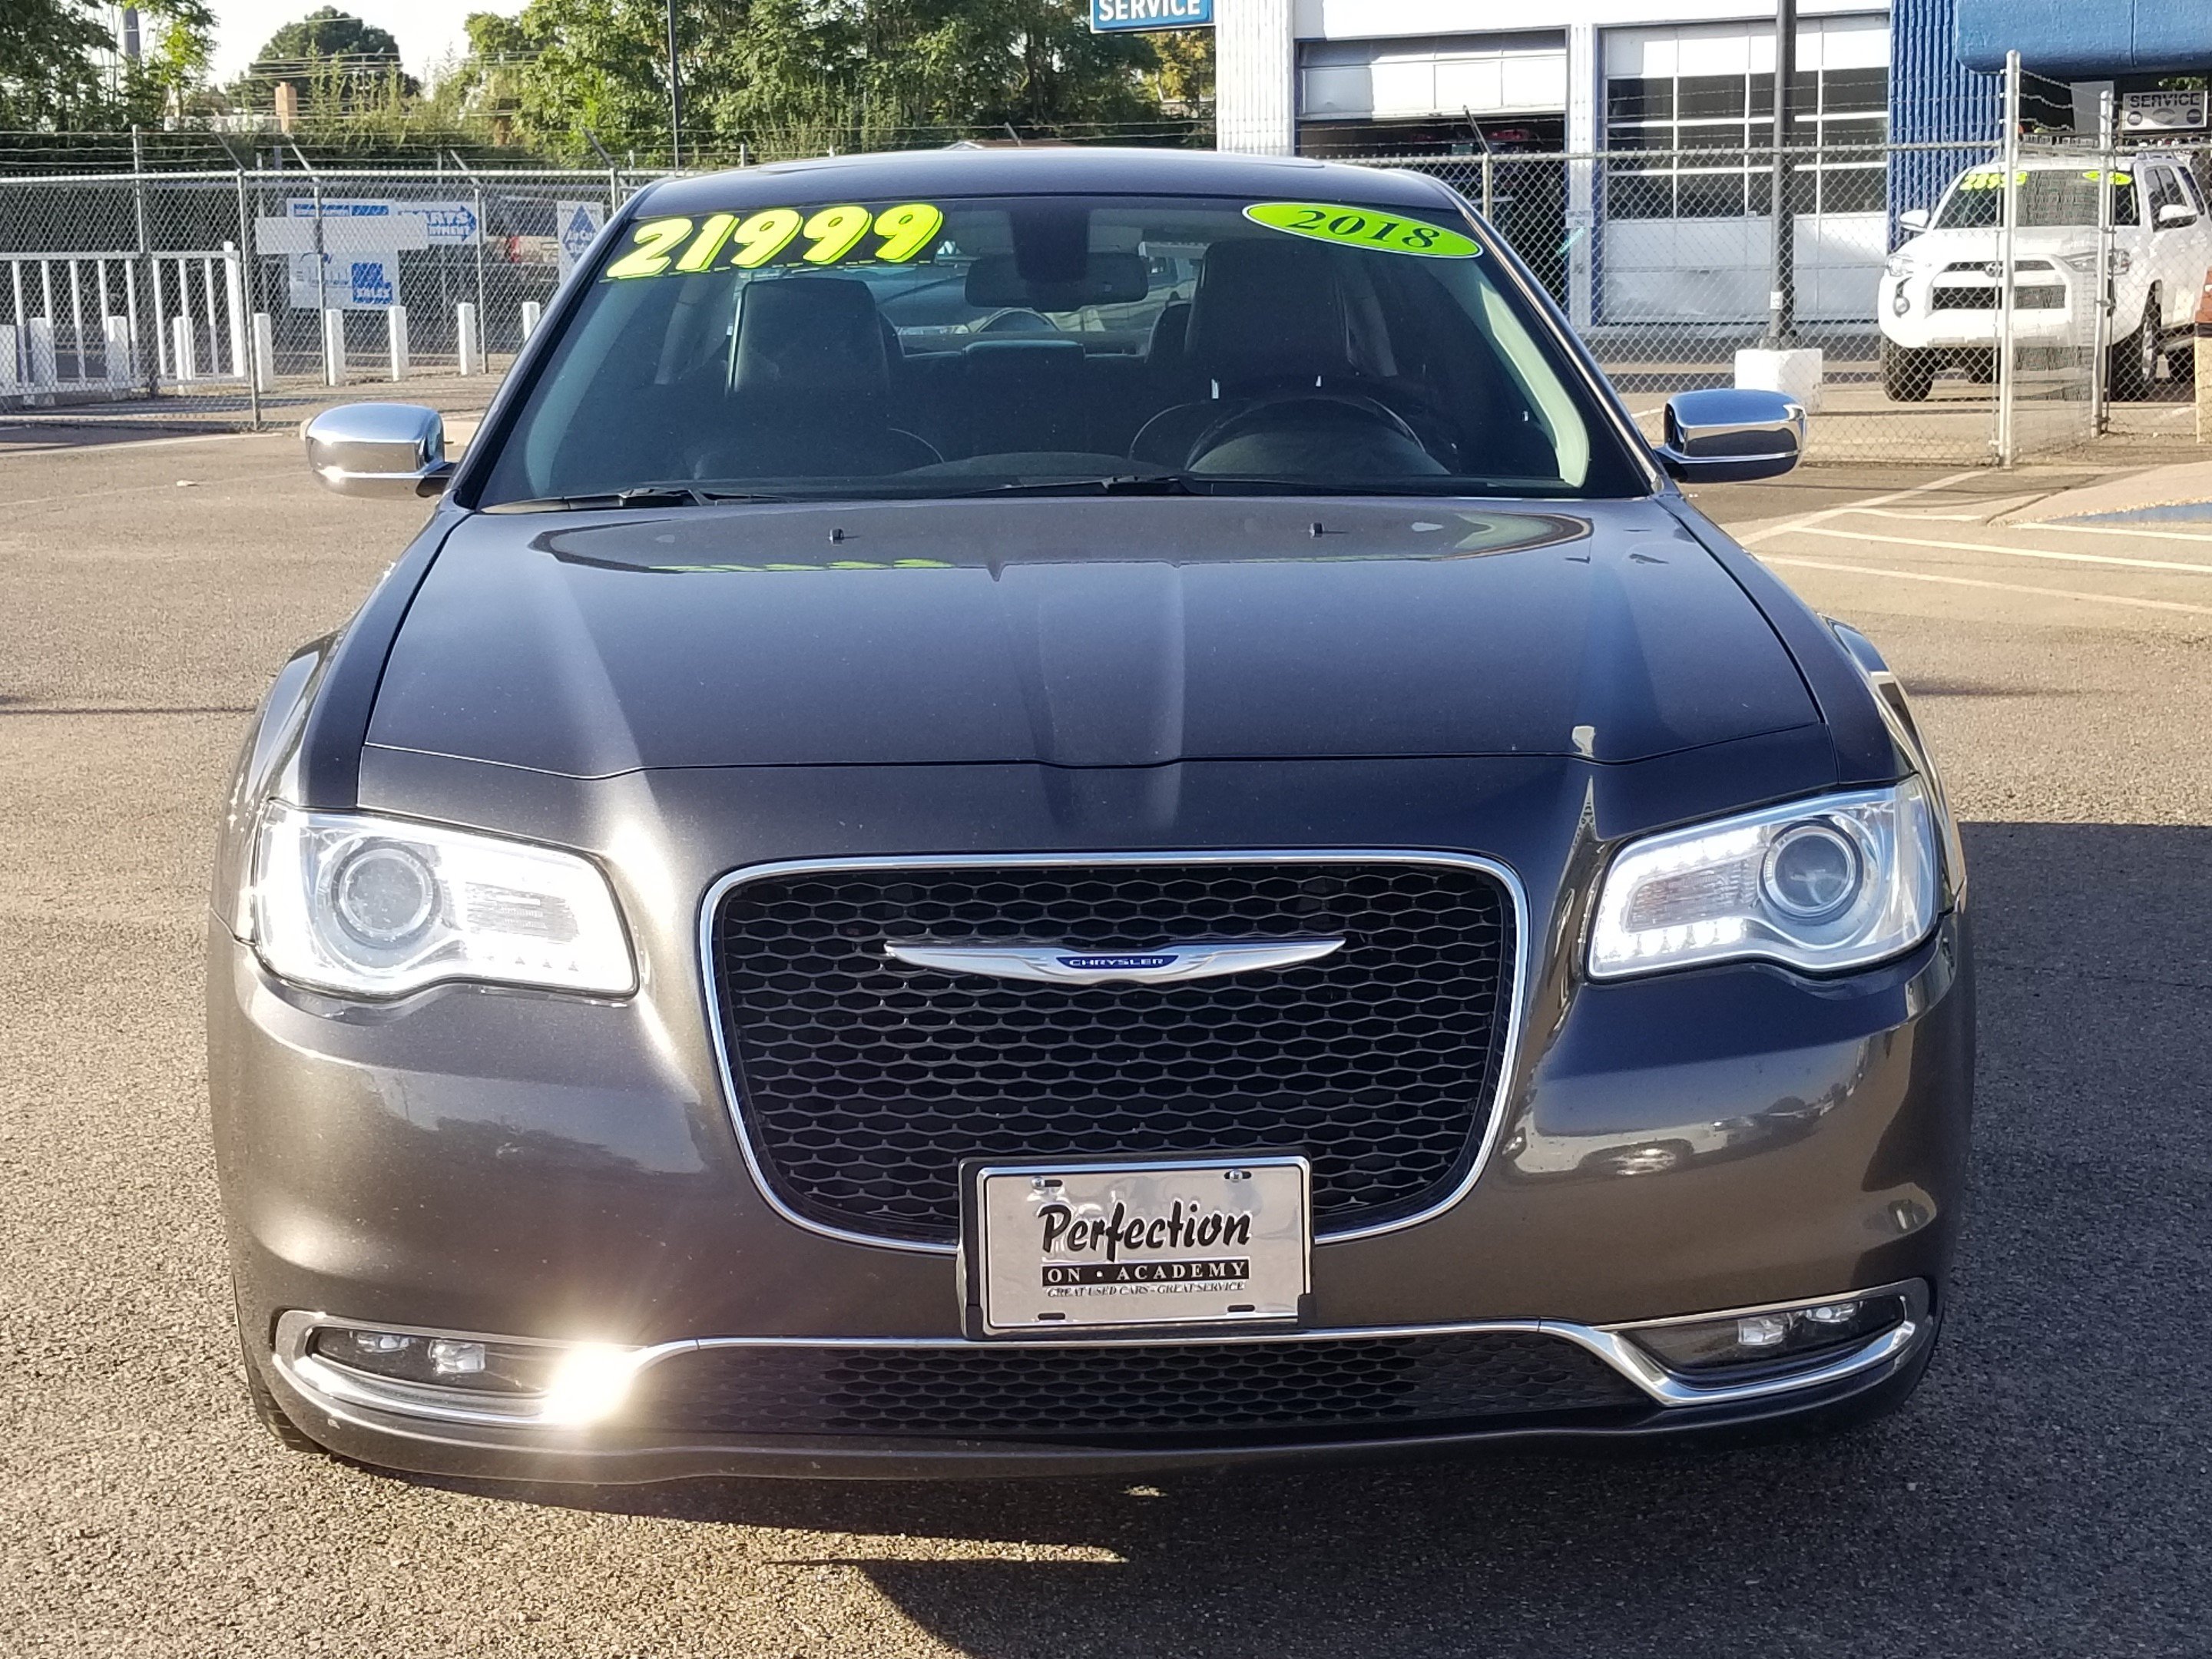 PreOwned 2018 Chrysler 300 Limited 4dr Car in Albuquerque